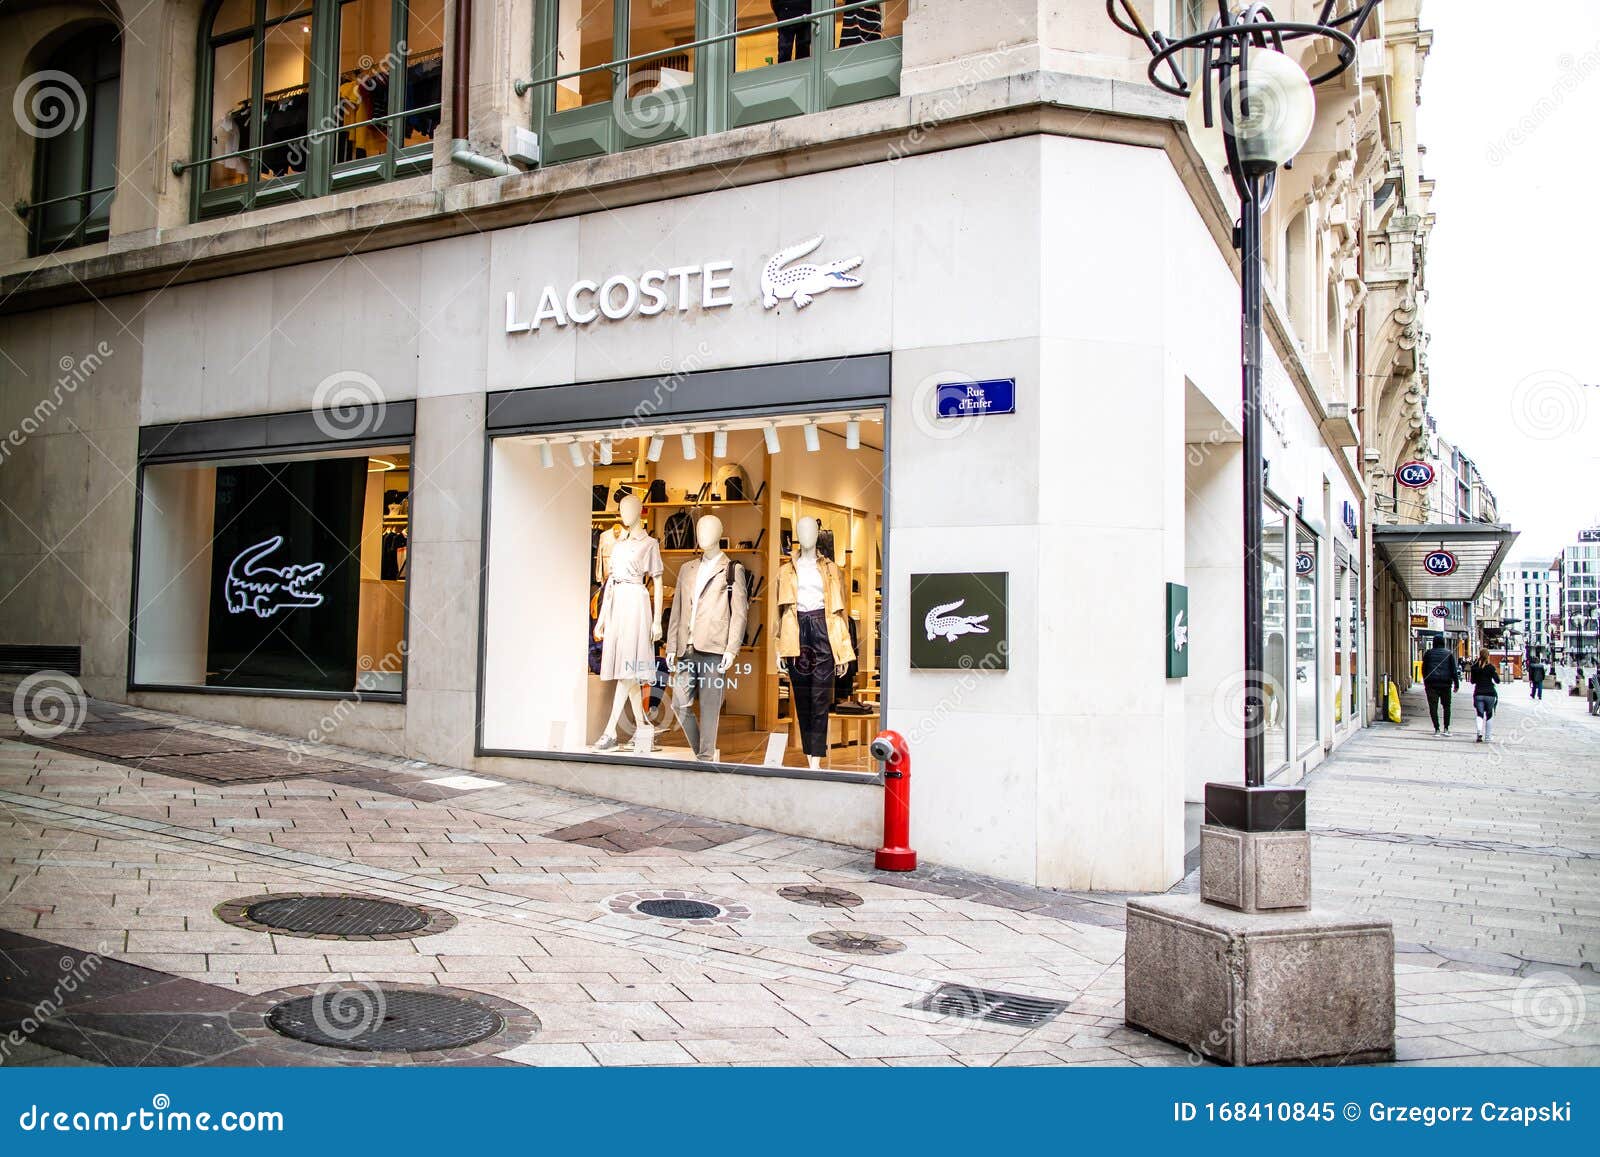 internettet slag dør Lacoste Store with Fashionable and Luxury Products, Logo, Sign. French  Clothing Company, Founded by Tennis Player Rene Lacoste Editorial Image -  Image of consumerism, facade: 168410845